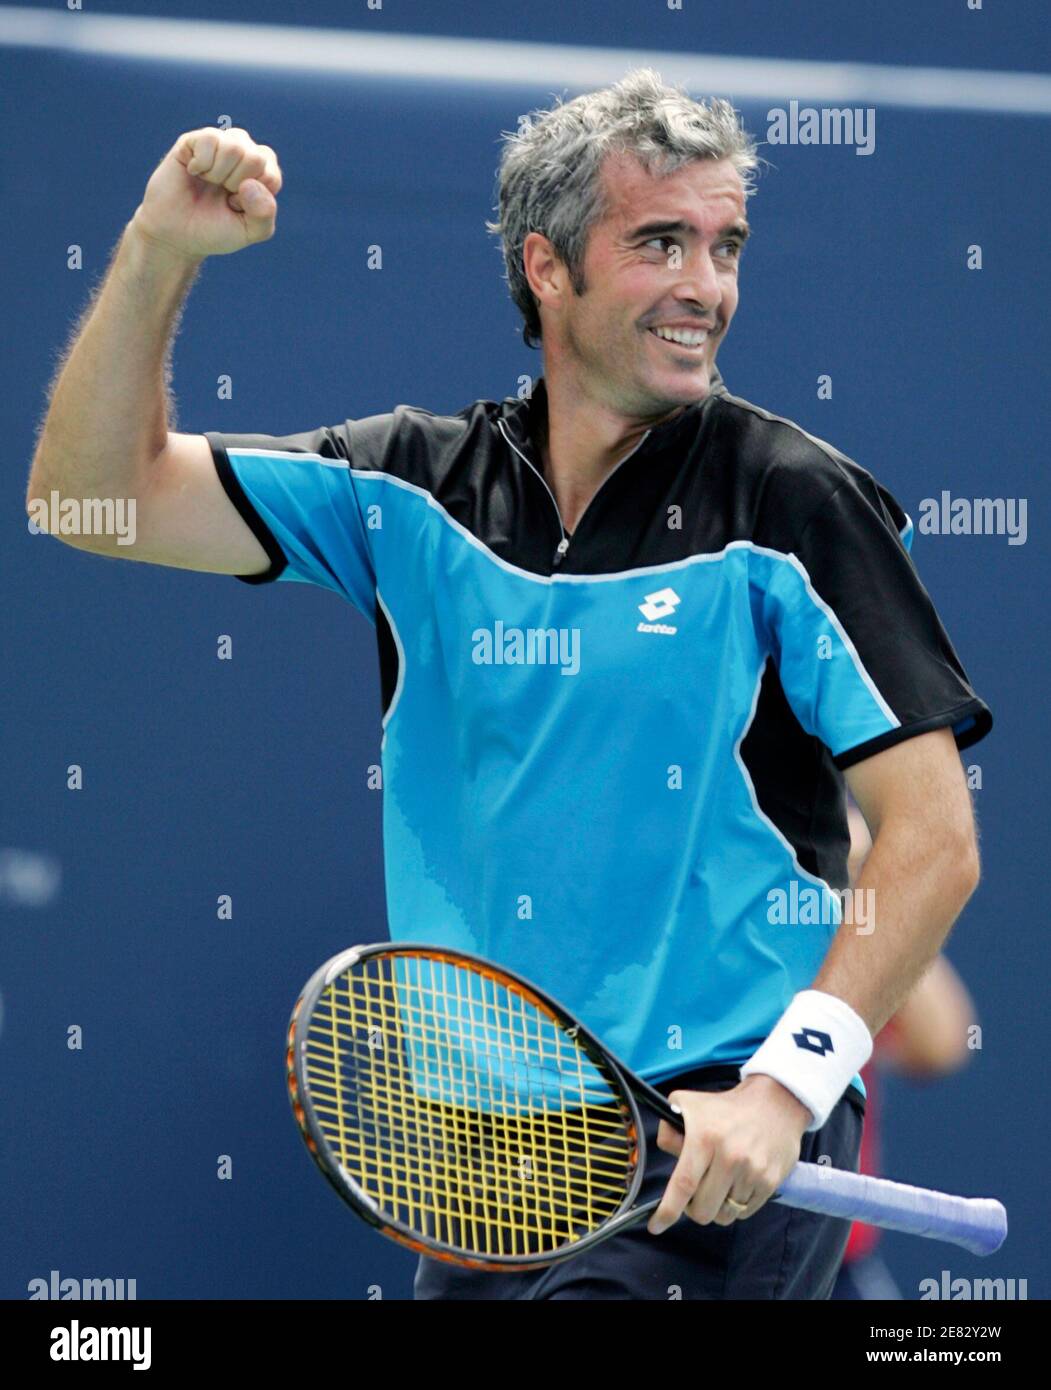 Davide Sanguinetti of Italy celebrates his win over David Nalbandian of  Argentina at the end of their match at the Toronto Masters tennis  tournament in Toronto August 7, 2006. REUTERS/Peter Jones (CANADA